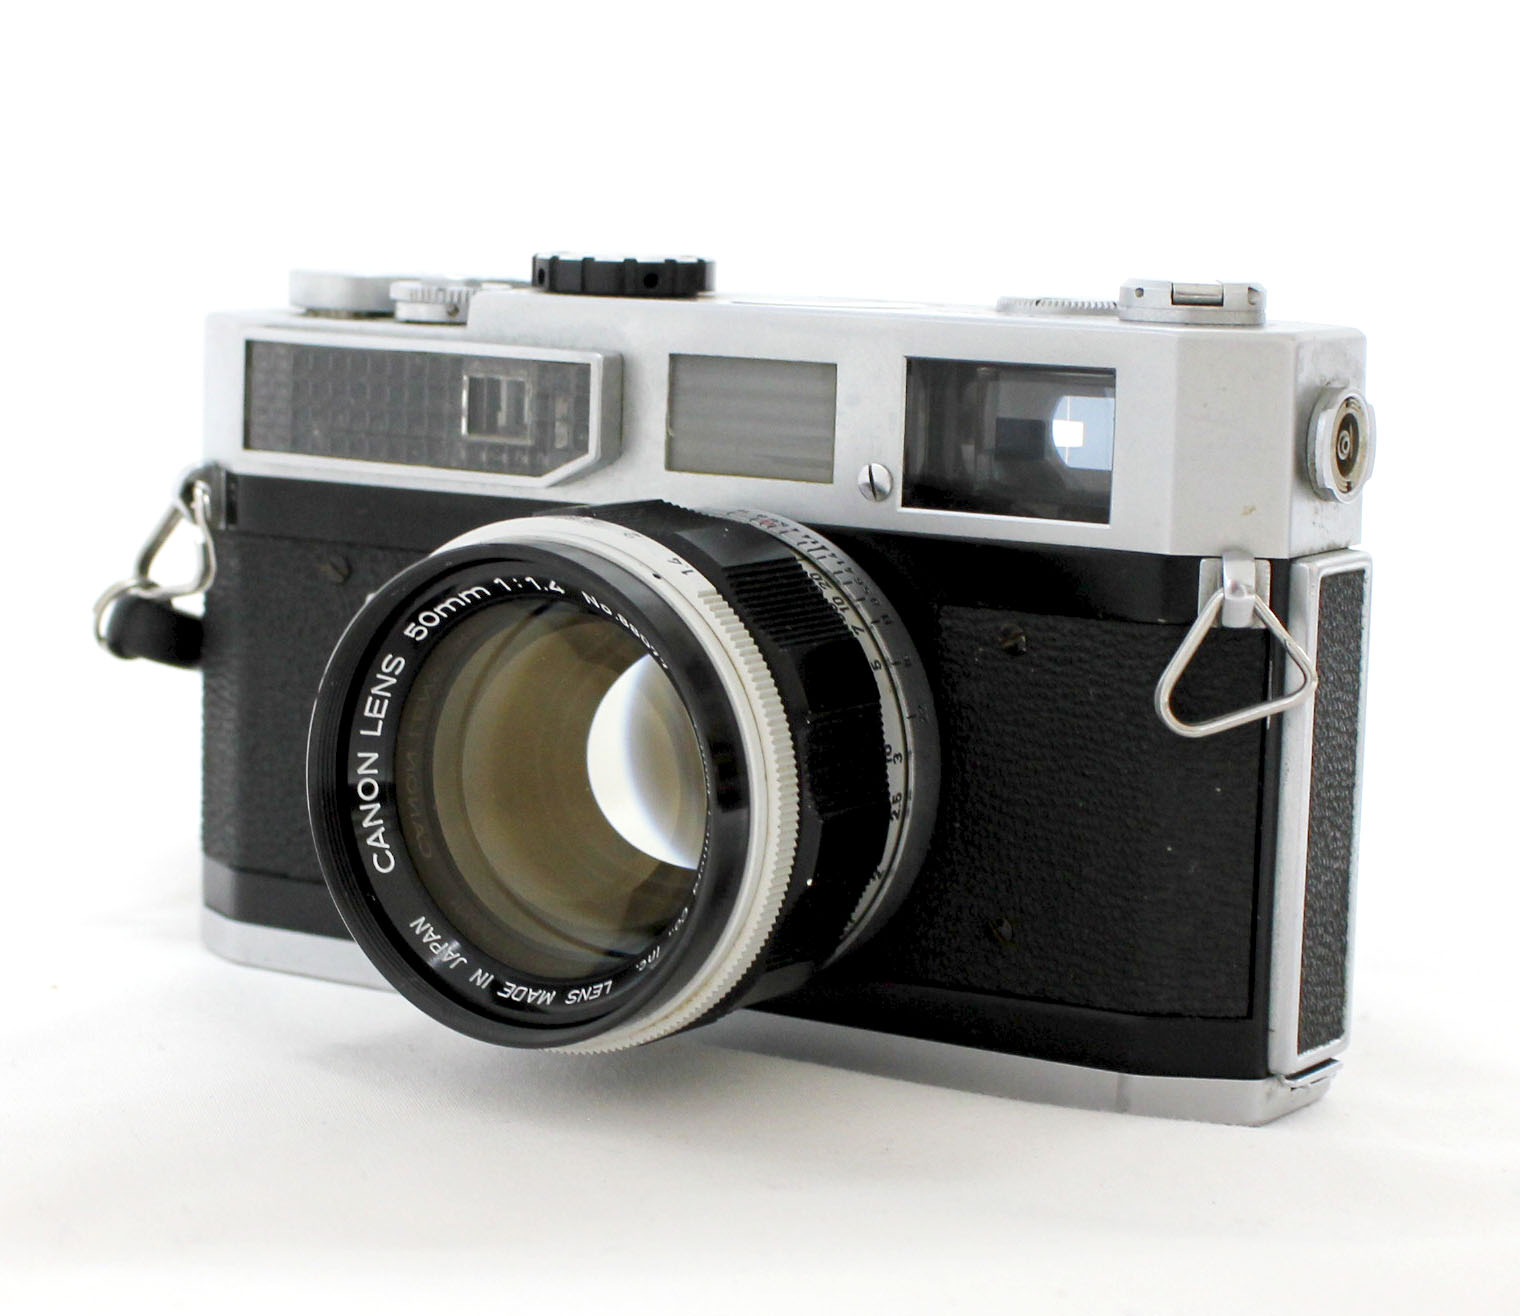 Japan Used Camera Shop | Canon Model 7 Rangefinder Film Camera with 50mm F/1.4 L39 Lens from Japan